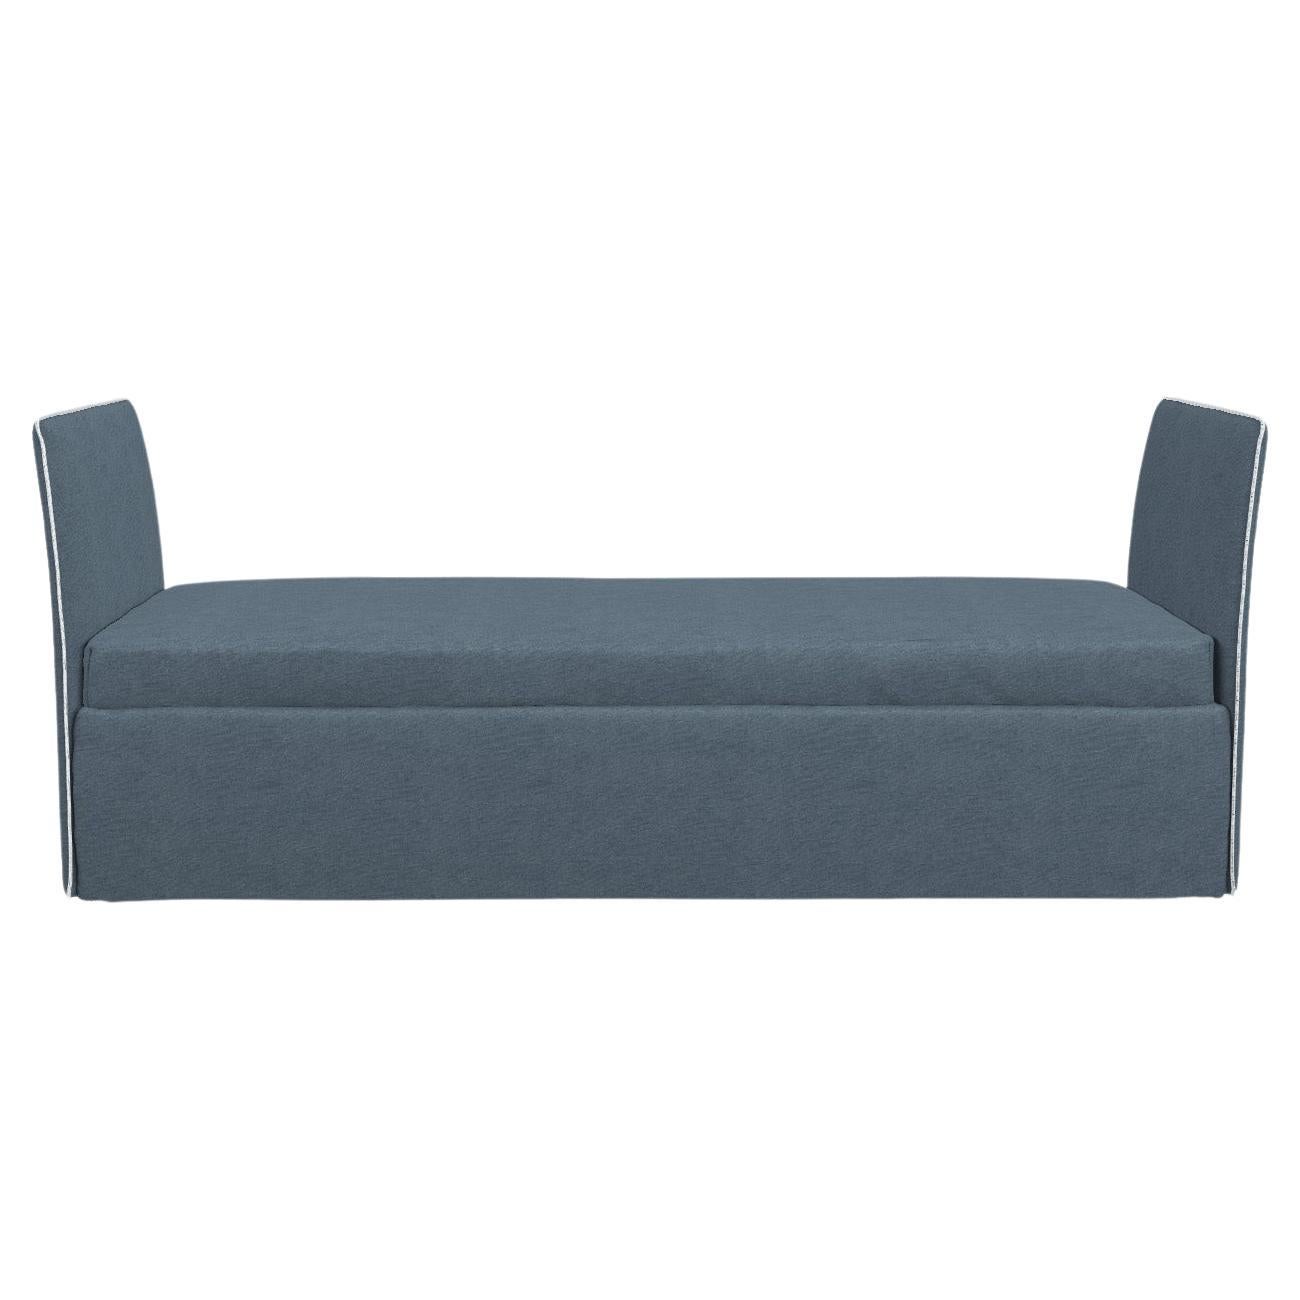 Gervasoni Open 2 Small Modular Bed Sofa in Munch Upholstery by Paola Navone For Sale